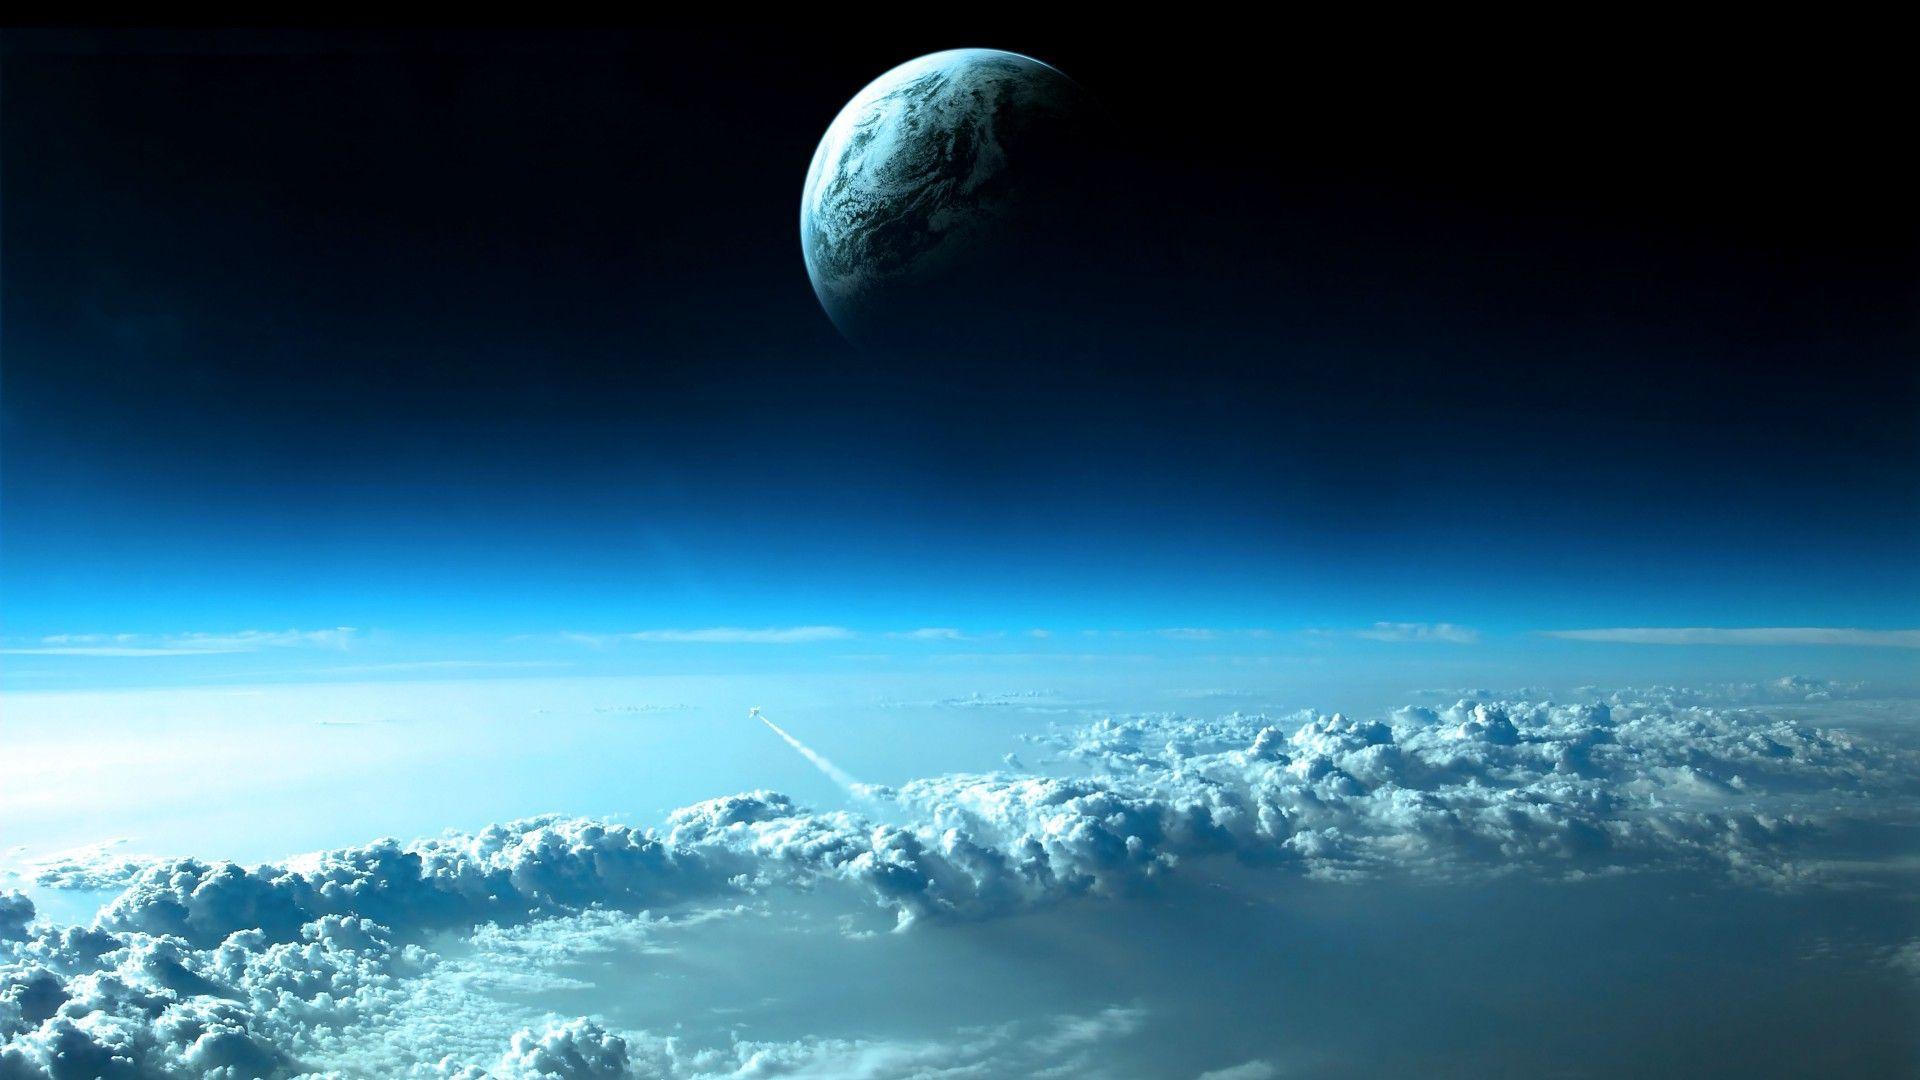 Hd Real Space Wallpapers 1080P Hd Backgrounds 8 HD Wallpapers